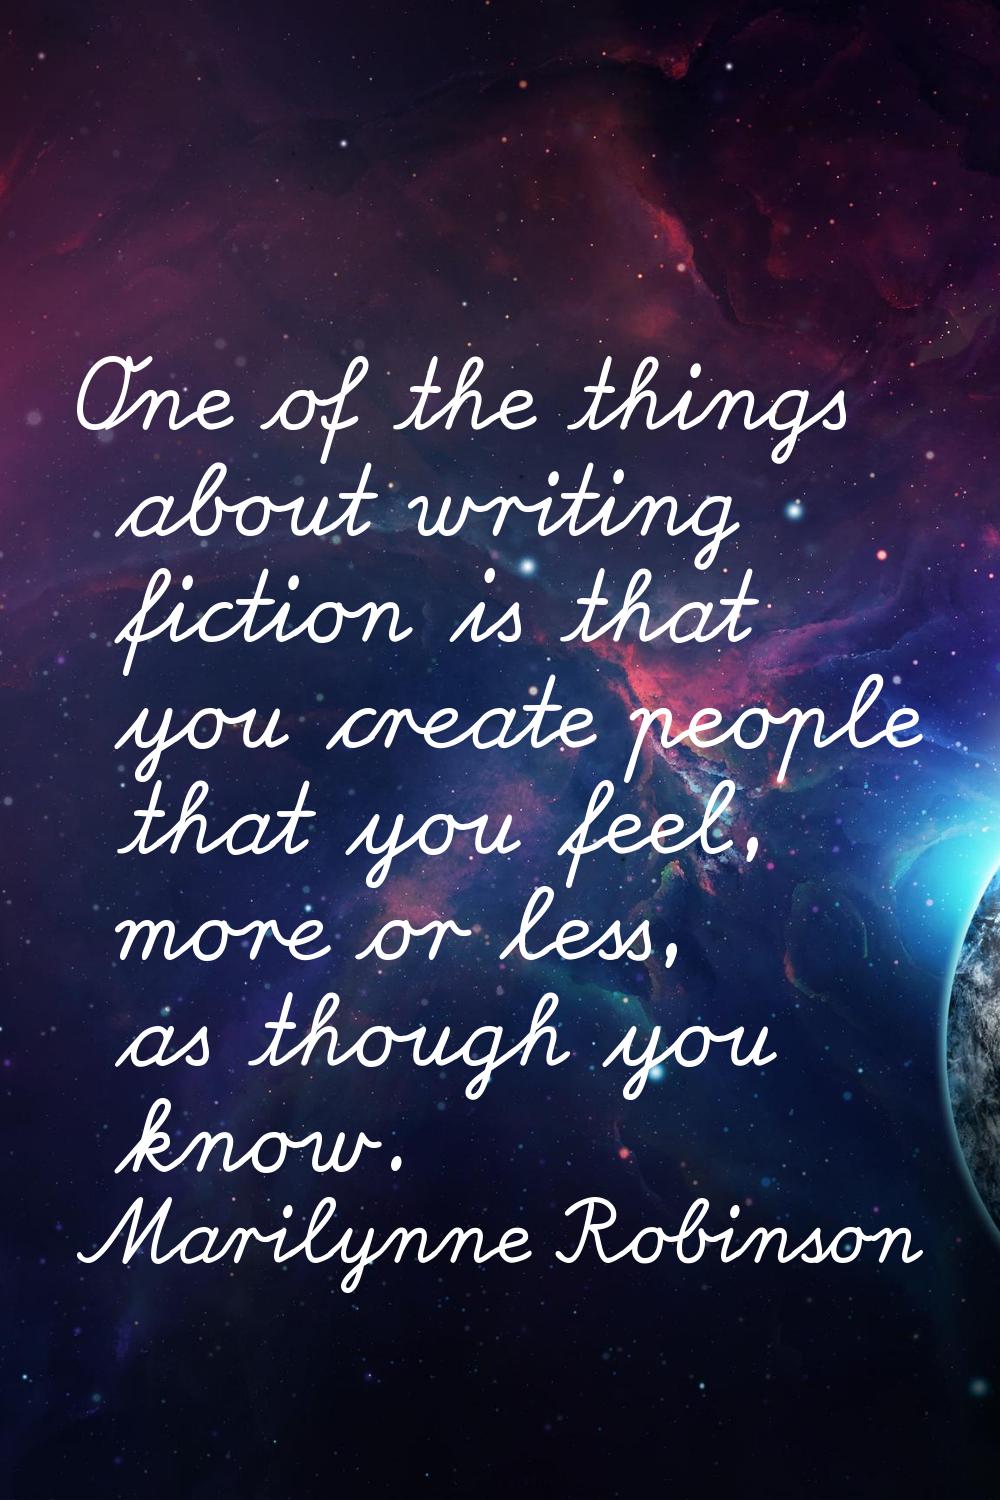 One of the things about writing fiction is that you create people that you feel, more or less, as t